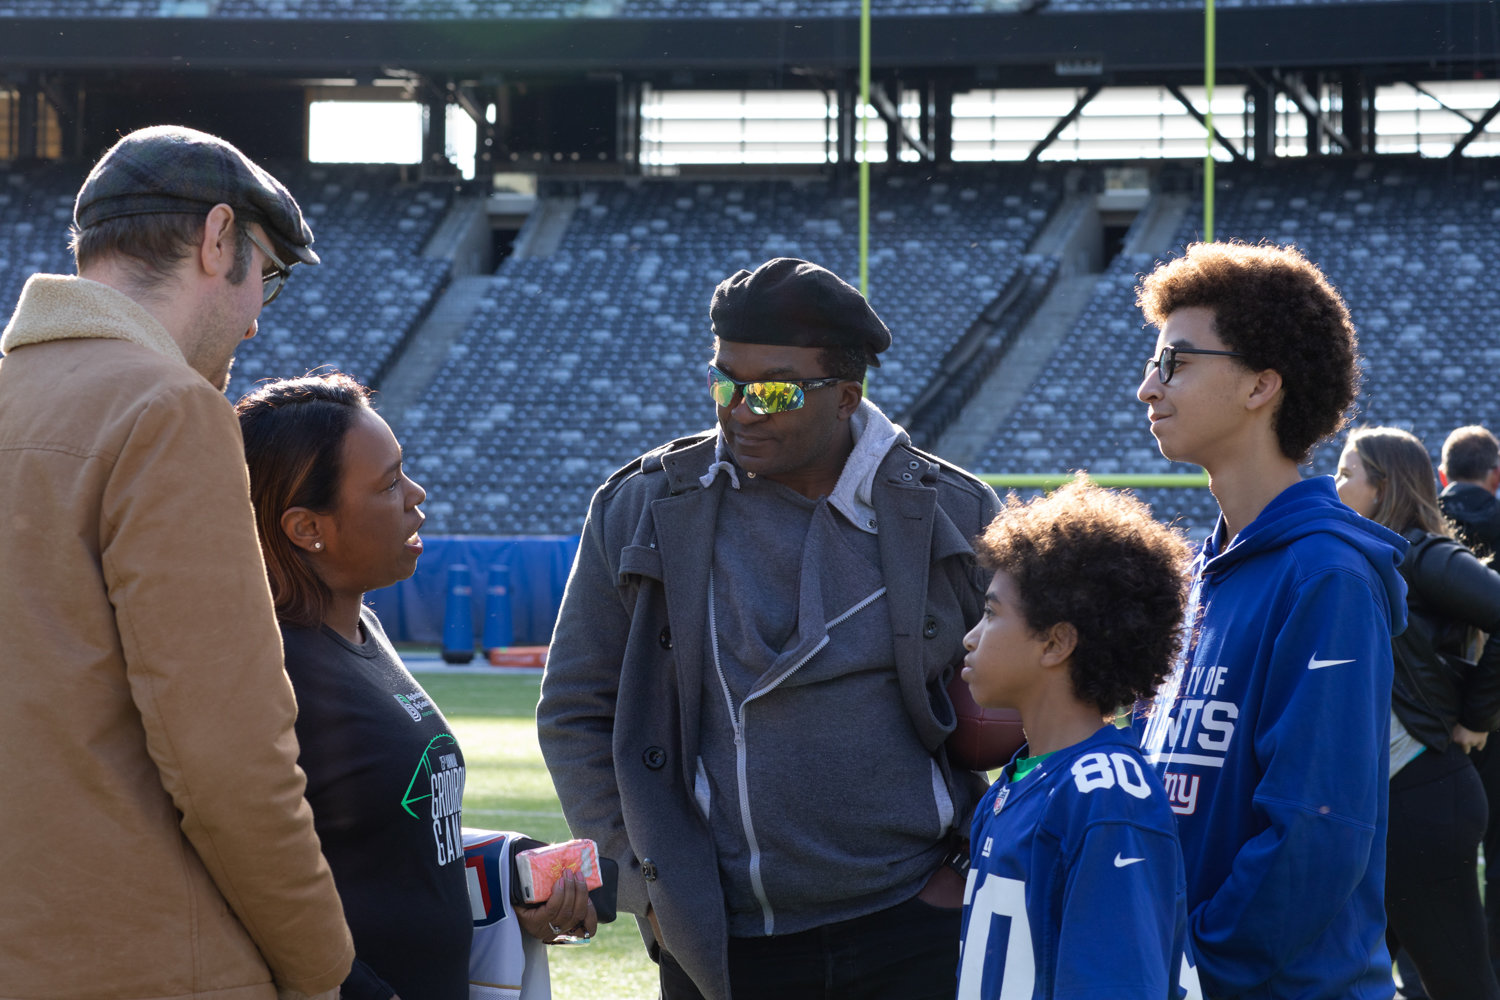 Home-grown community leader Alicia Guevara, chief executive of Big Brothers Big Sisters of New York City, second from left, attends the Gridiron Games fundraiser last month. The event helps support Big Brothers Big Sisters of New York City, an organization she took over as chief executive in May after spending years fighting hunger with Part of the Solution in the Bronx.